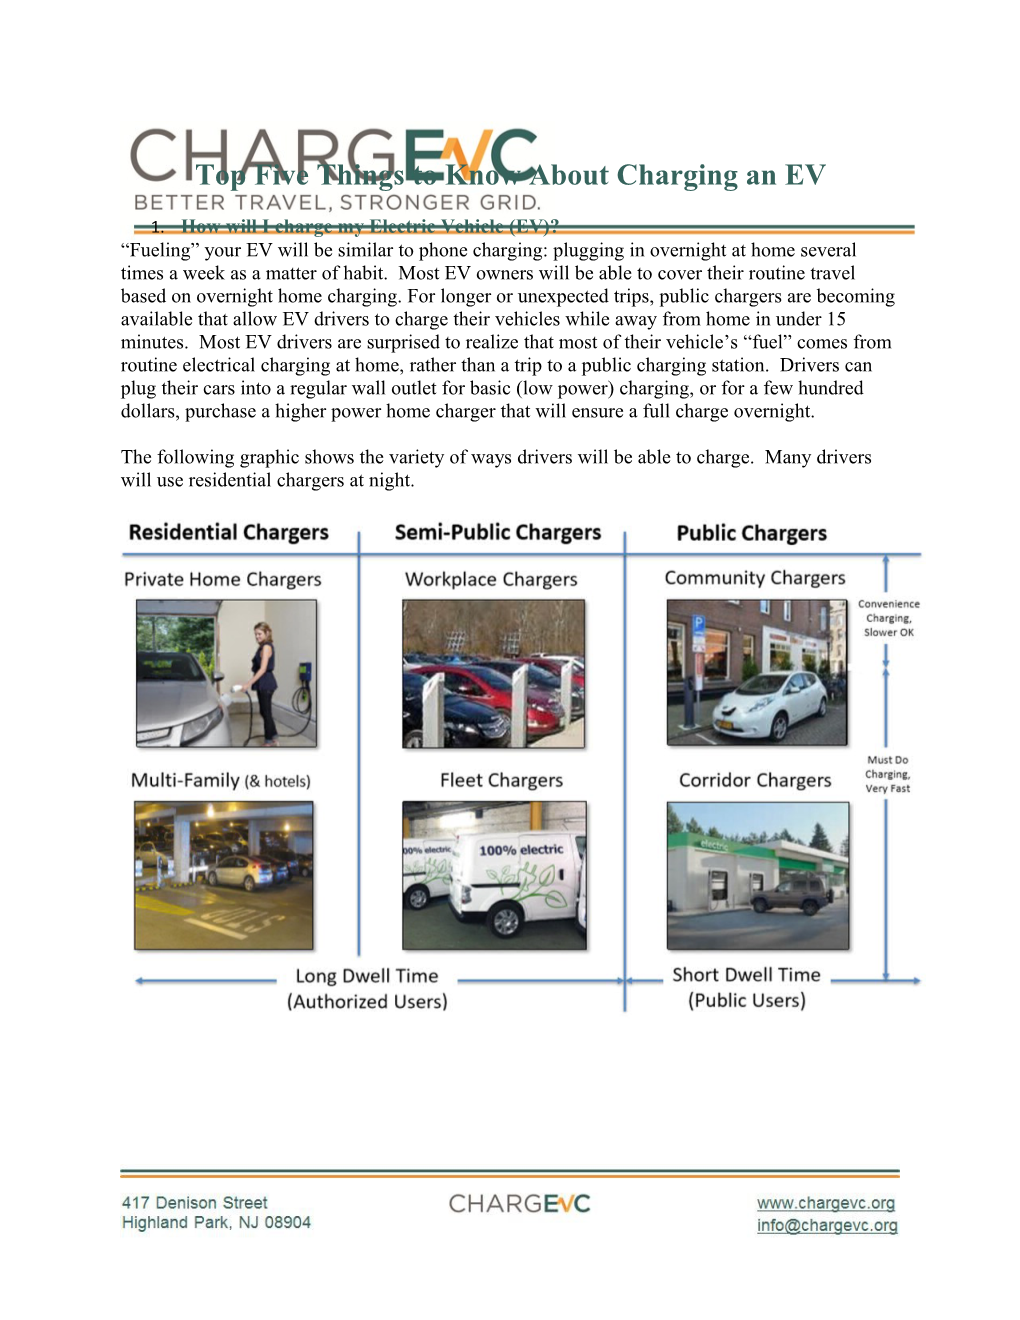 Top Five Things to Know About Charging an EV